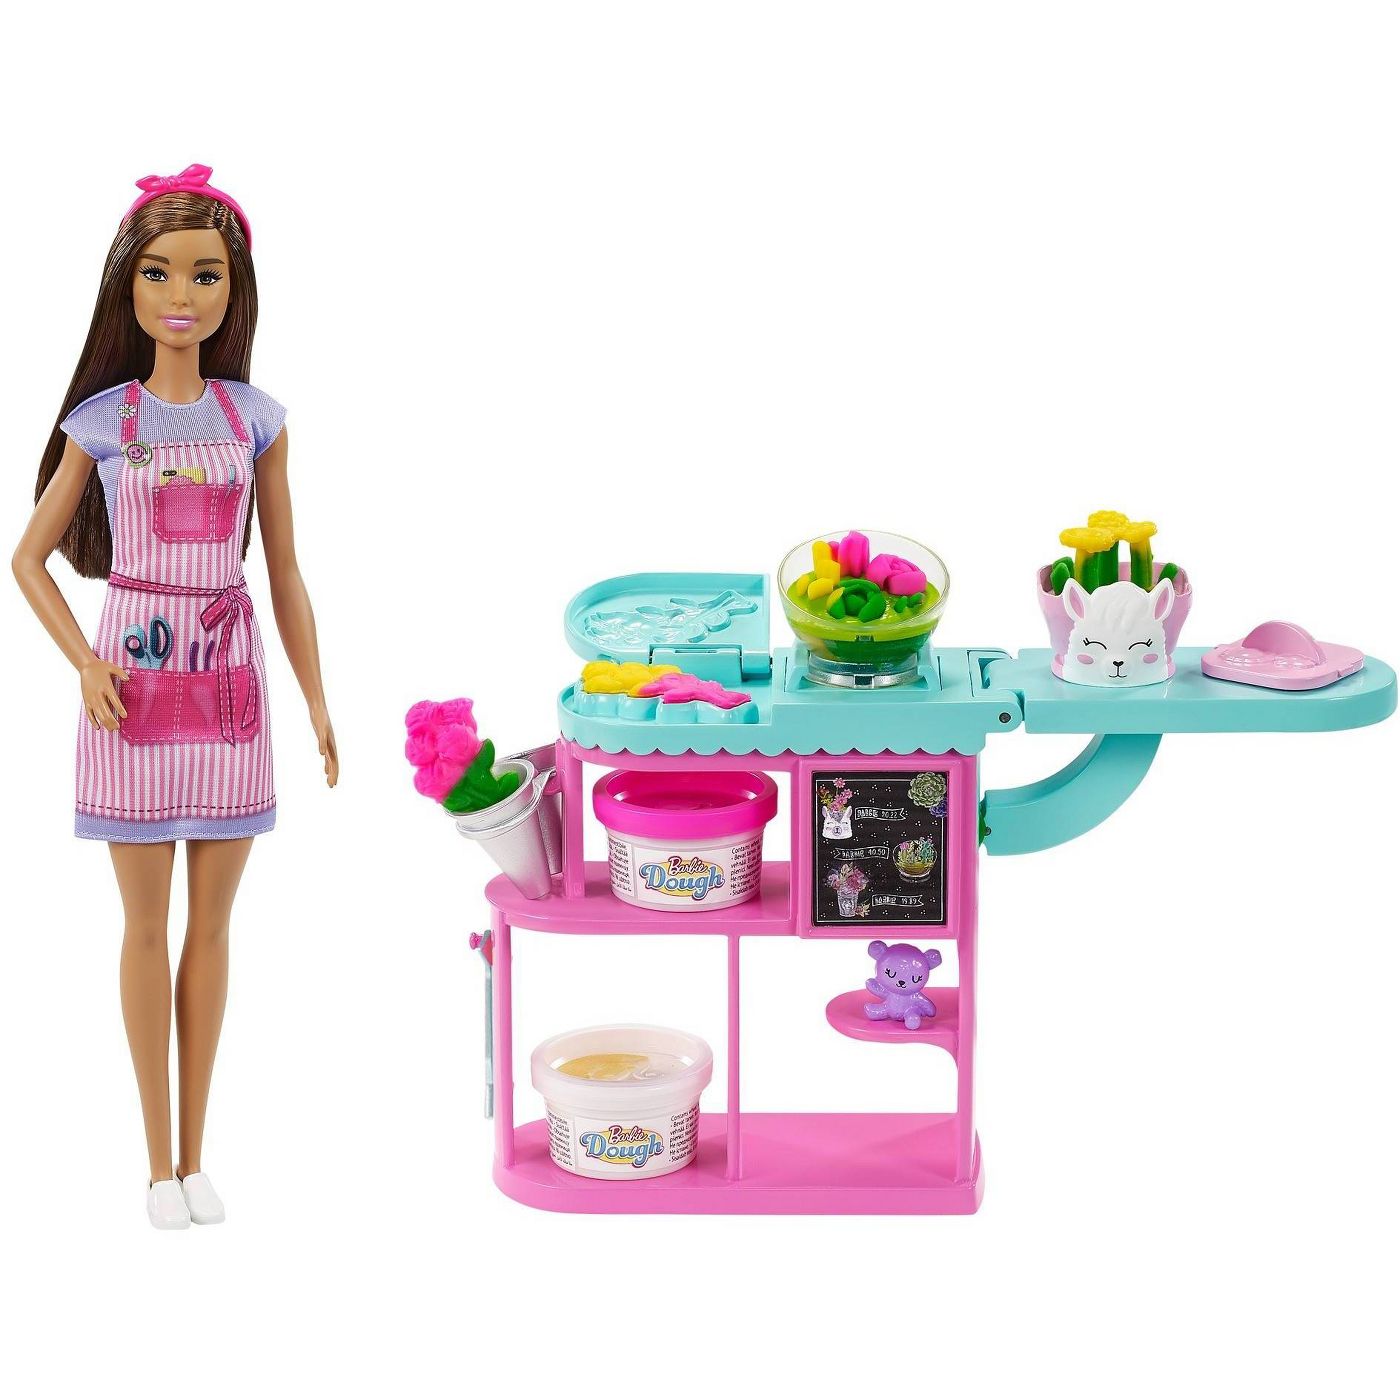 Barbie You Can Be Anything Dough Careers Florist Doll and Playset New with Box